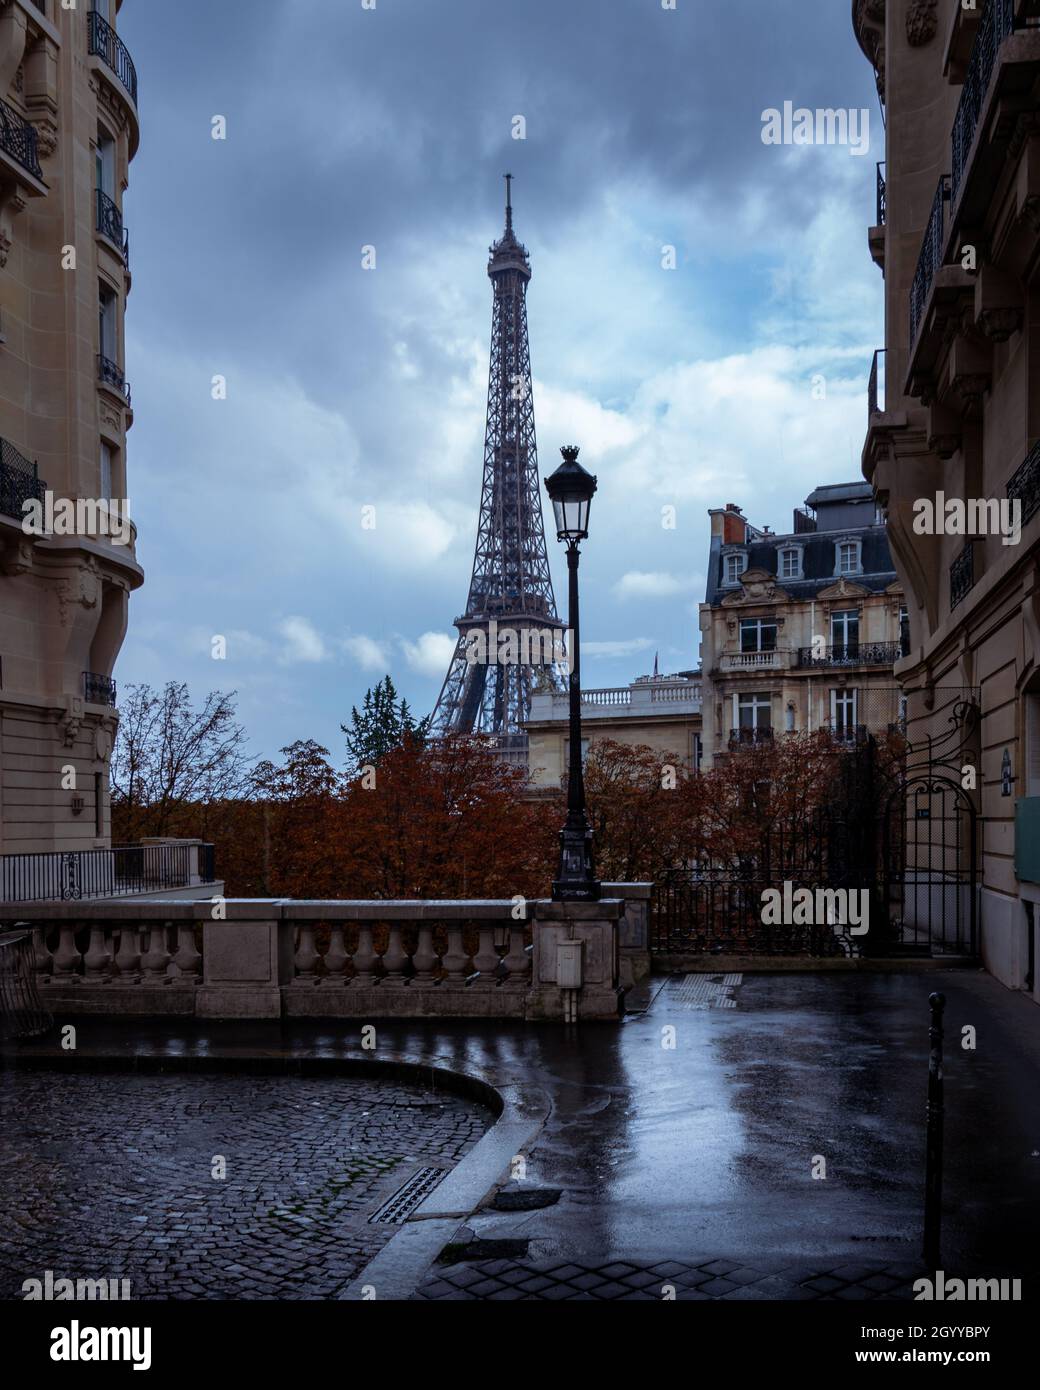 Secret spot in Paris France, Eiffel tower in the background Stock Photo